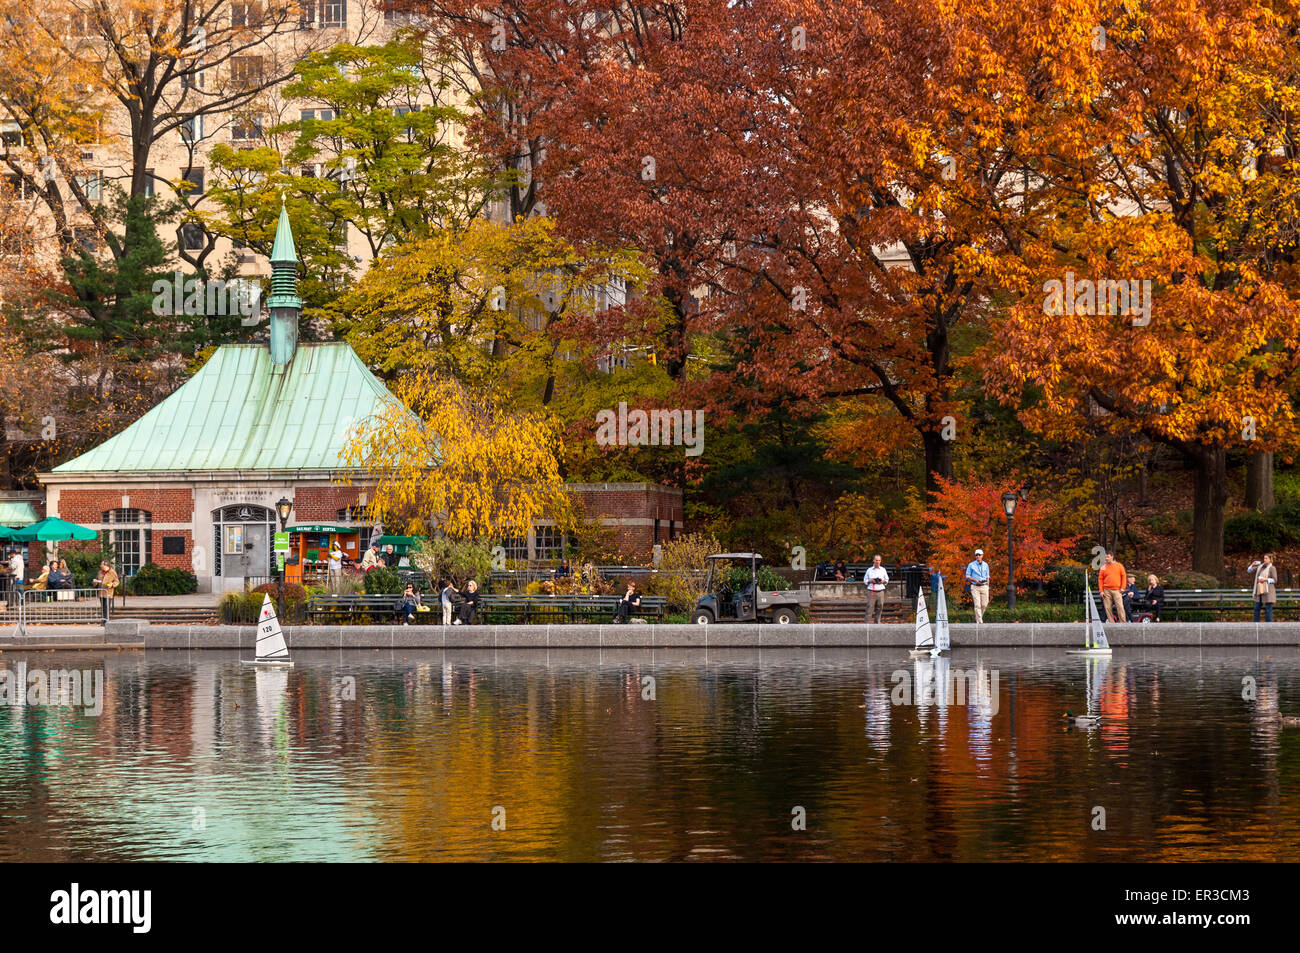 A people sailing a model boats at the Conservatory Water in New York's Central Park Stock Photo